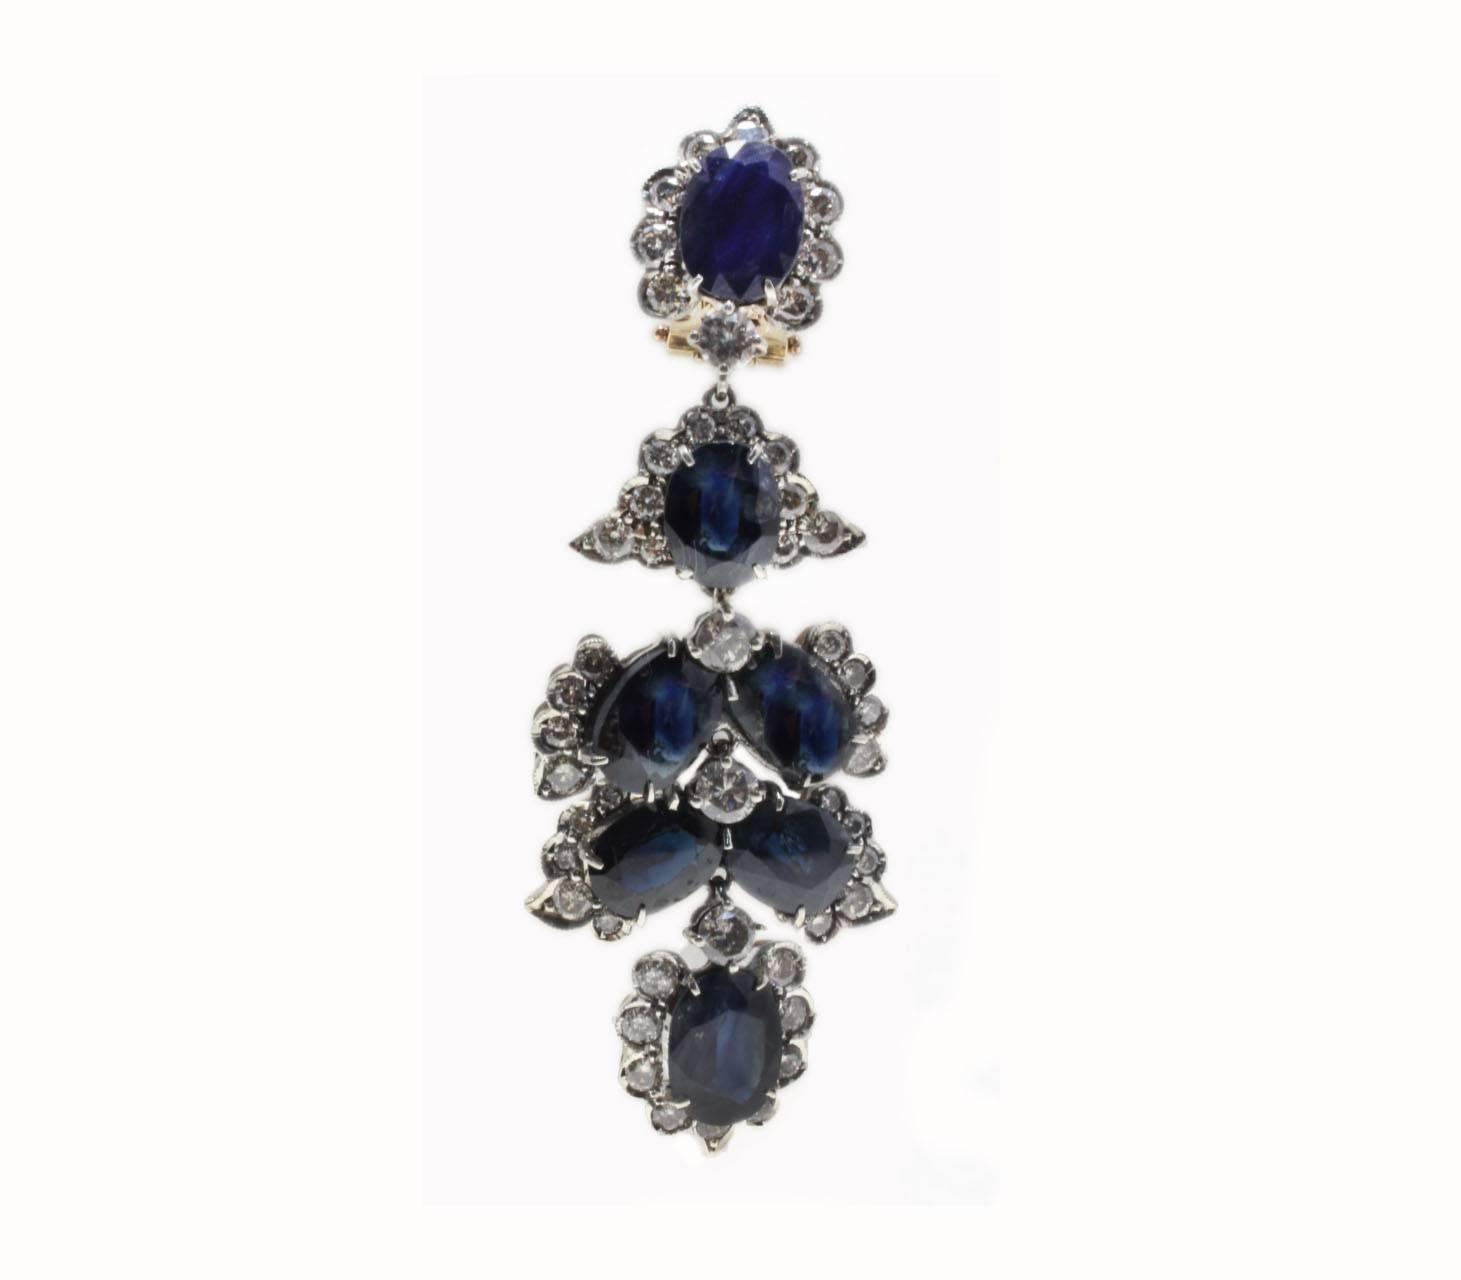 SHIPPING POLICY: 
No additional costs will be added to this order. 
Shipping costs will be totally covered by the seller (customs duties included).

Classic and shapely chandelier earrings,  embellished with blue sapphires drops, each drop is